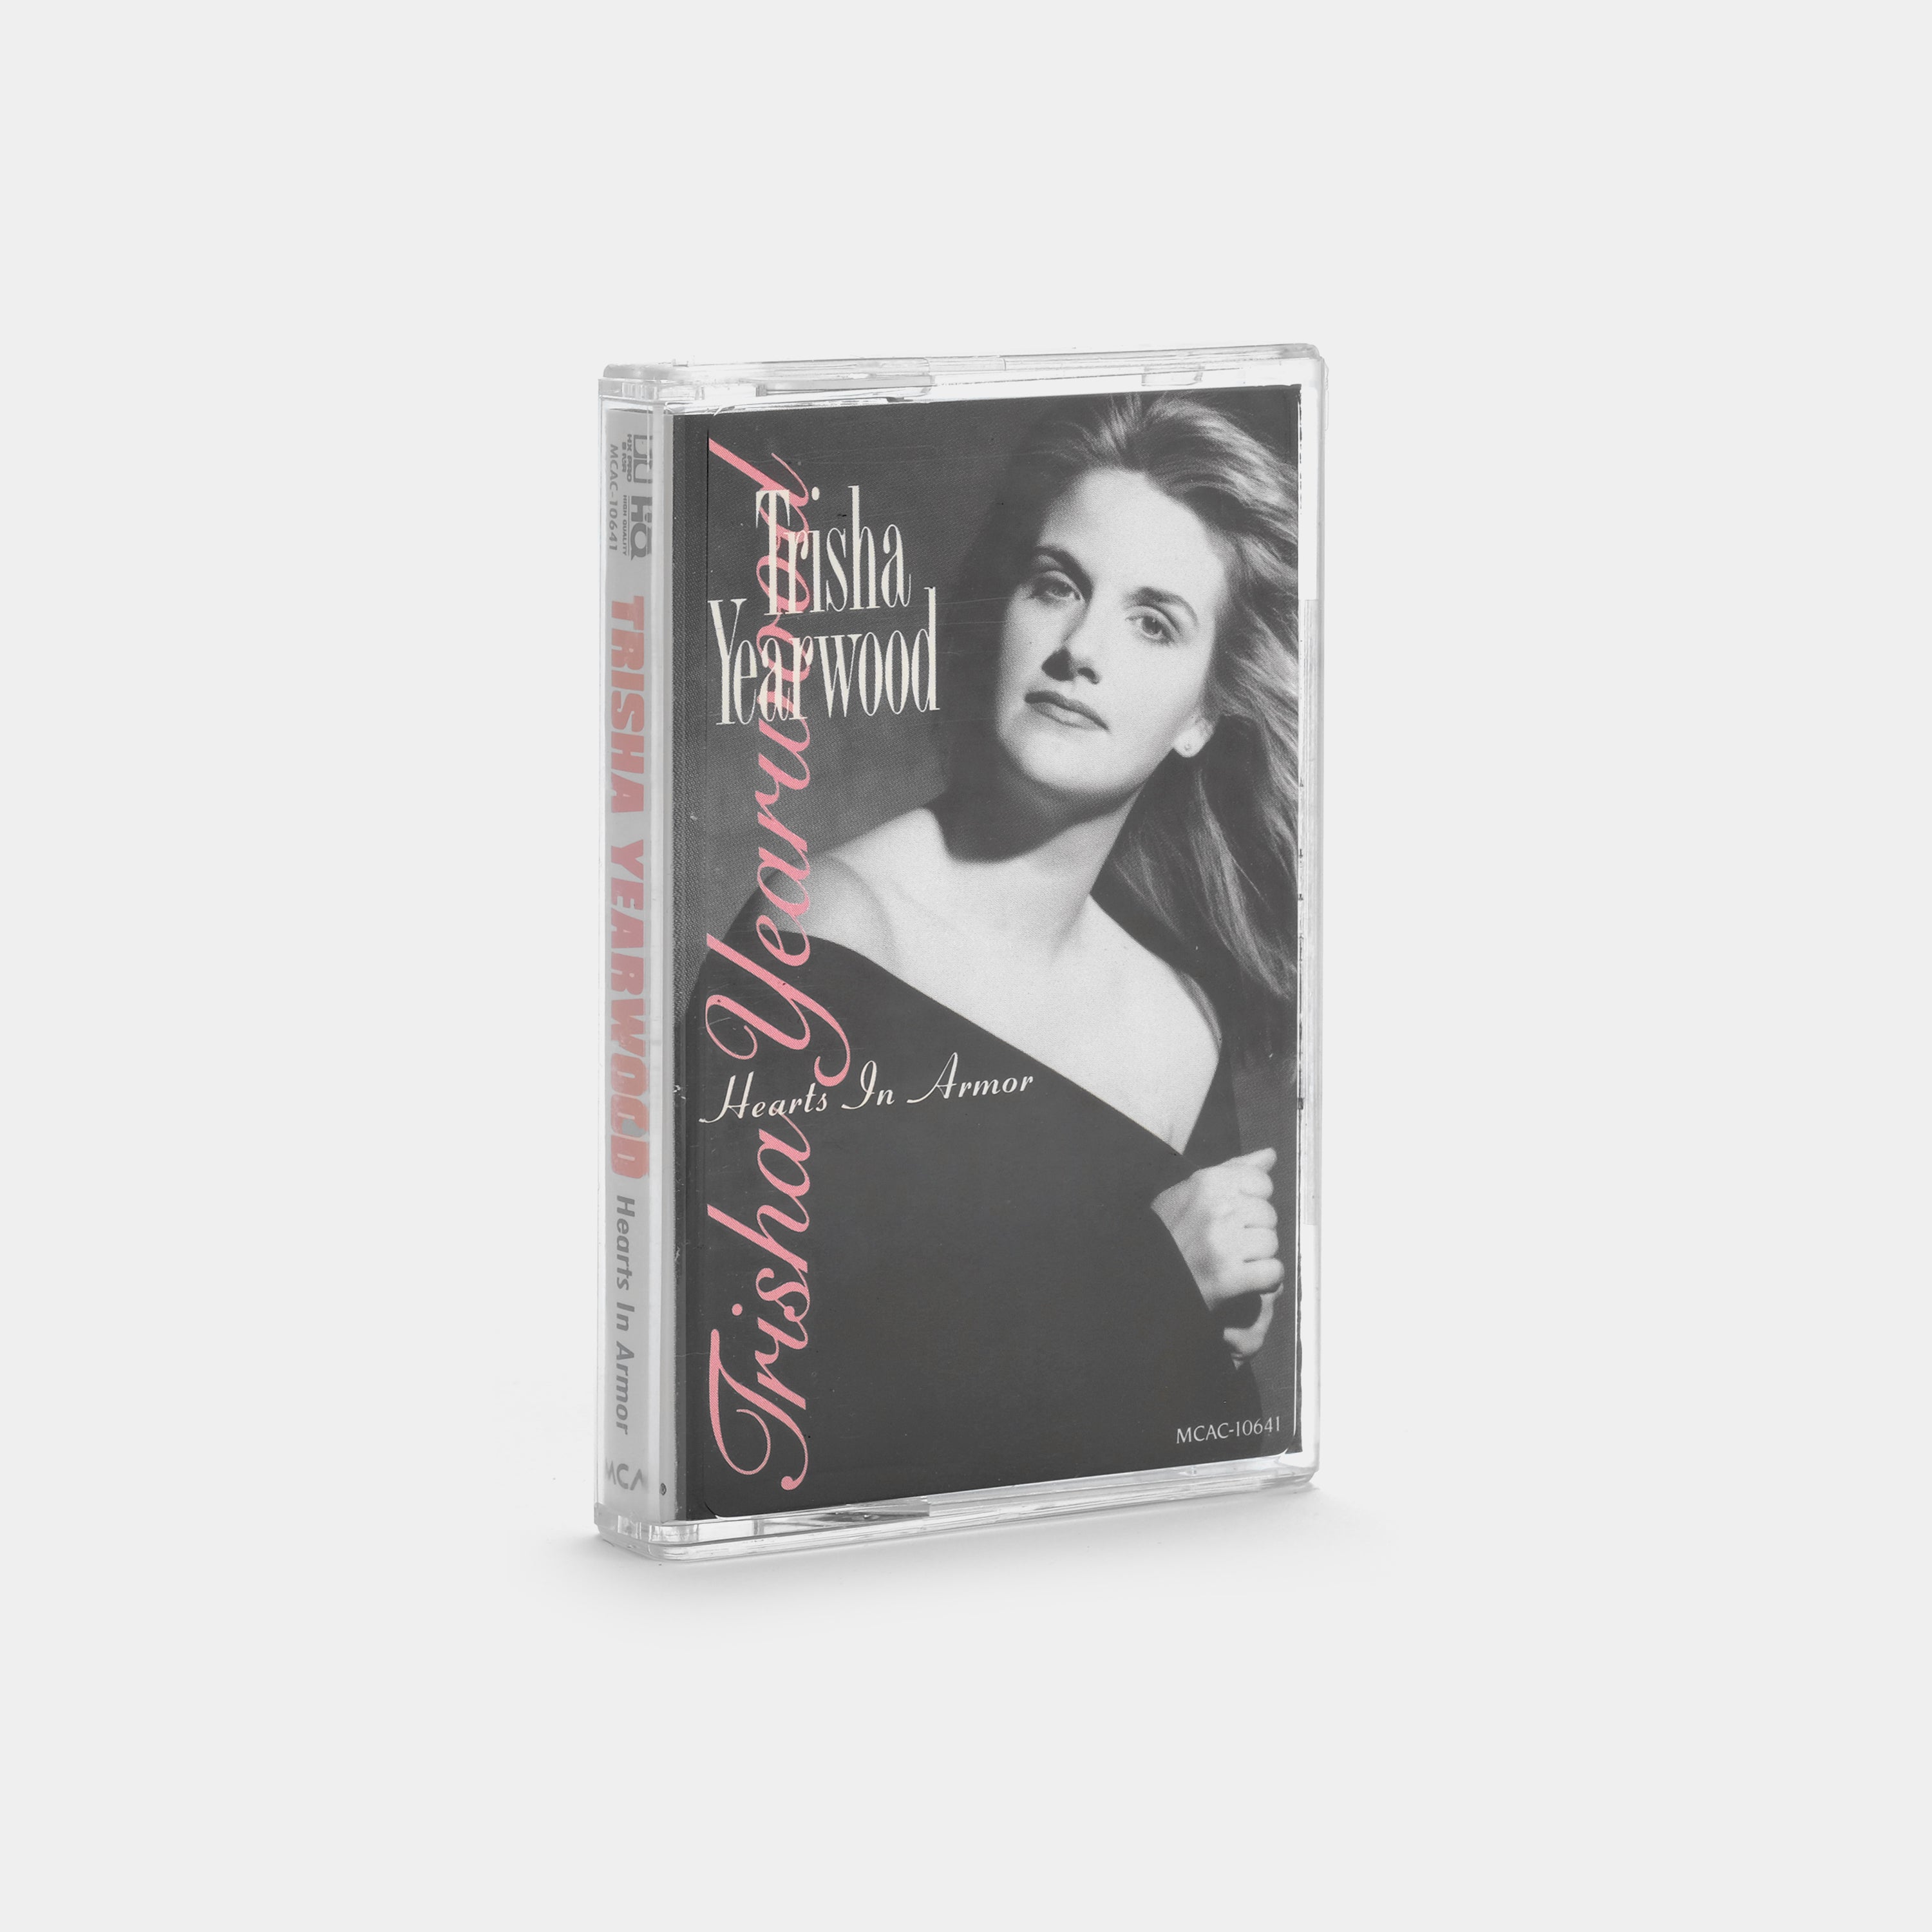 Trisha Yearwood - Hearts In Armor Cassette Tape